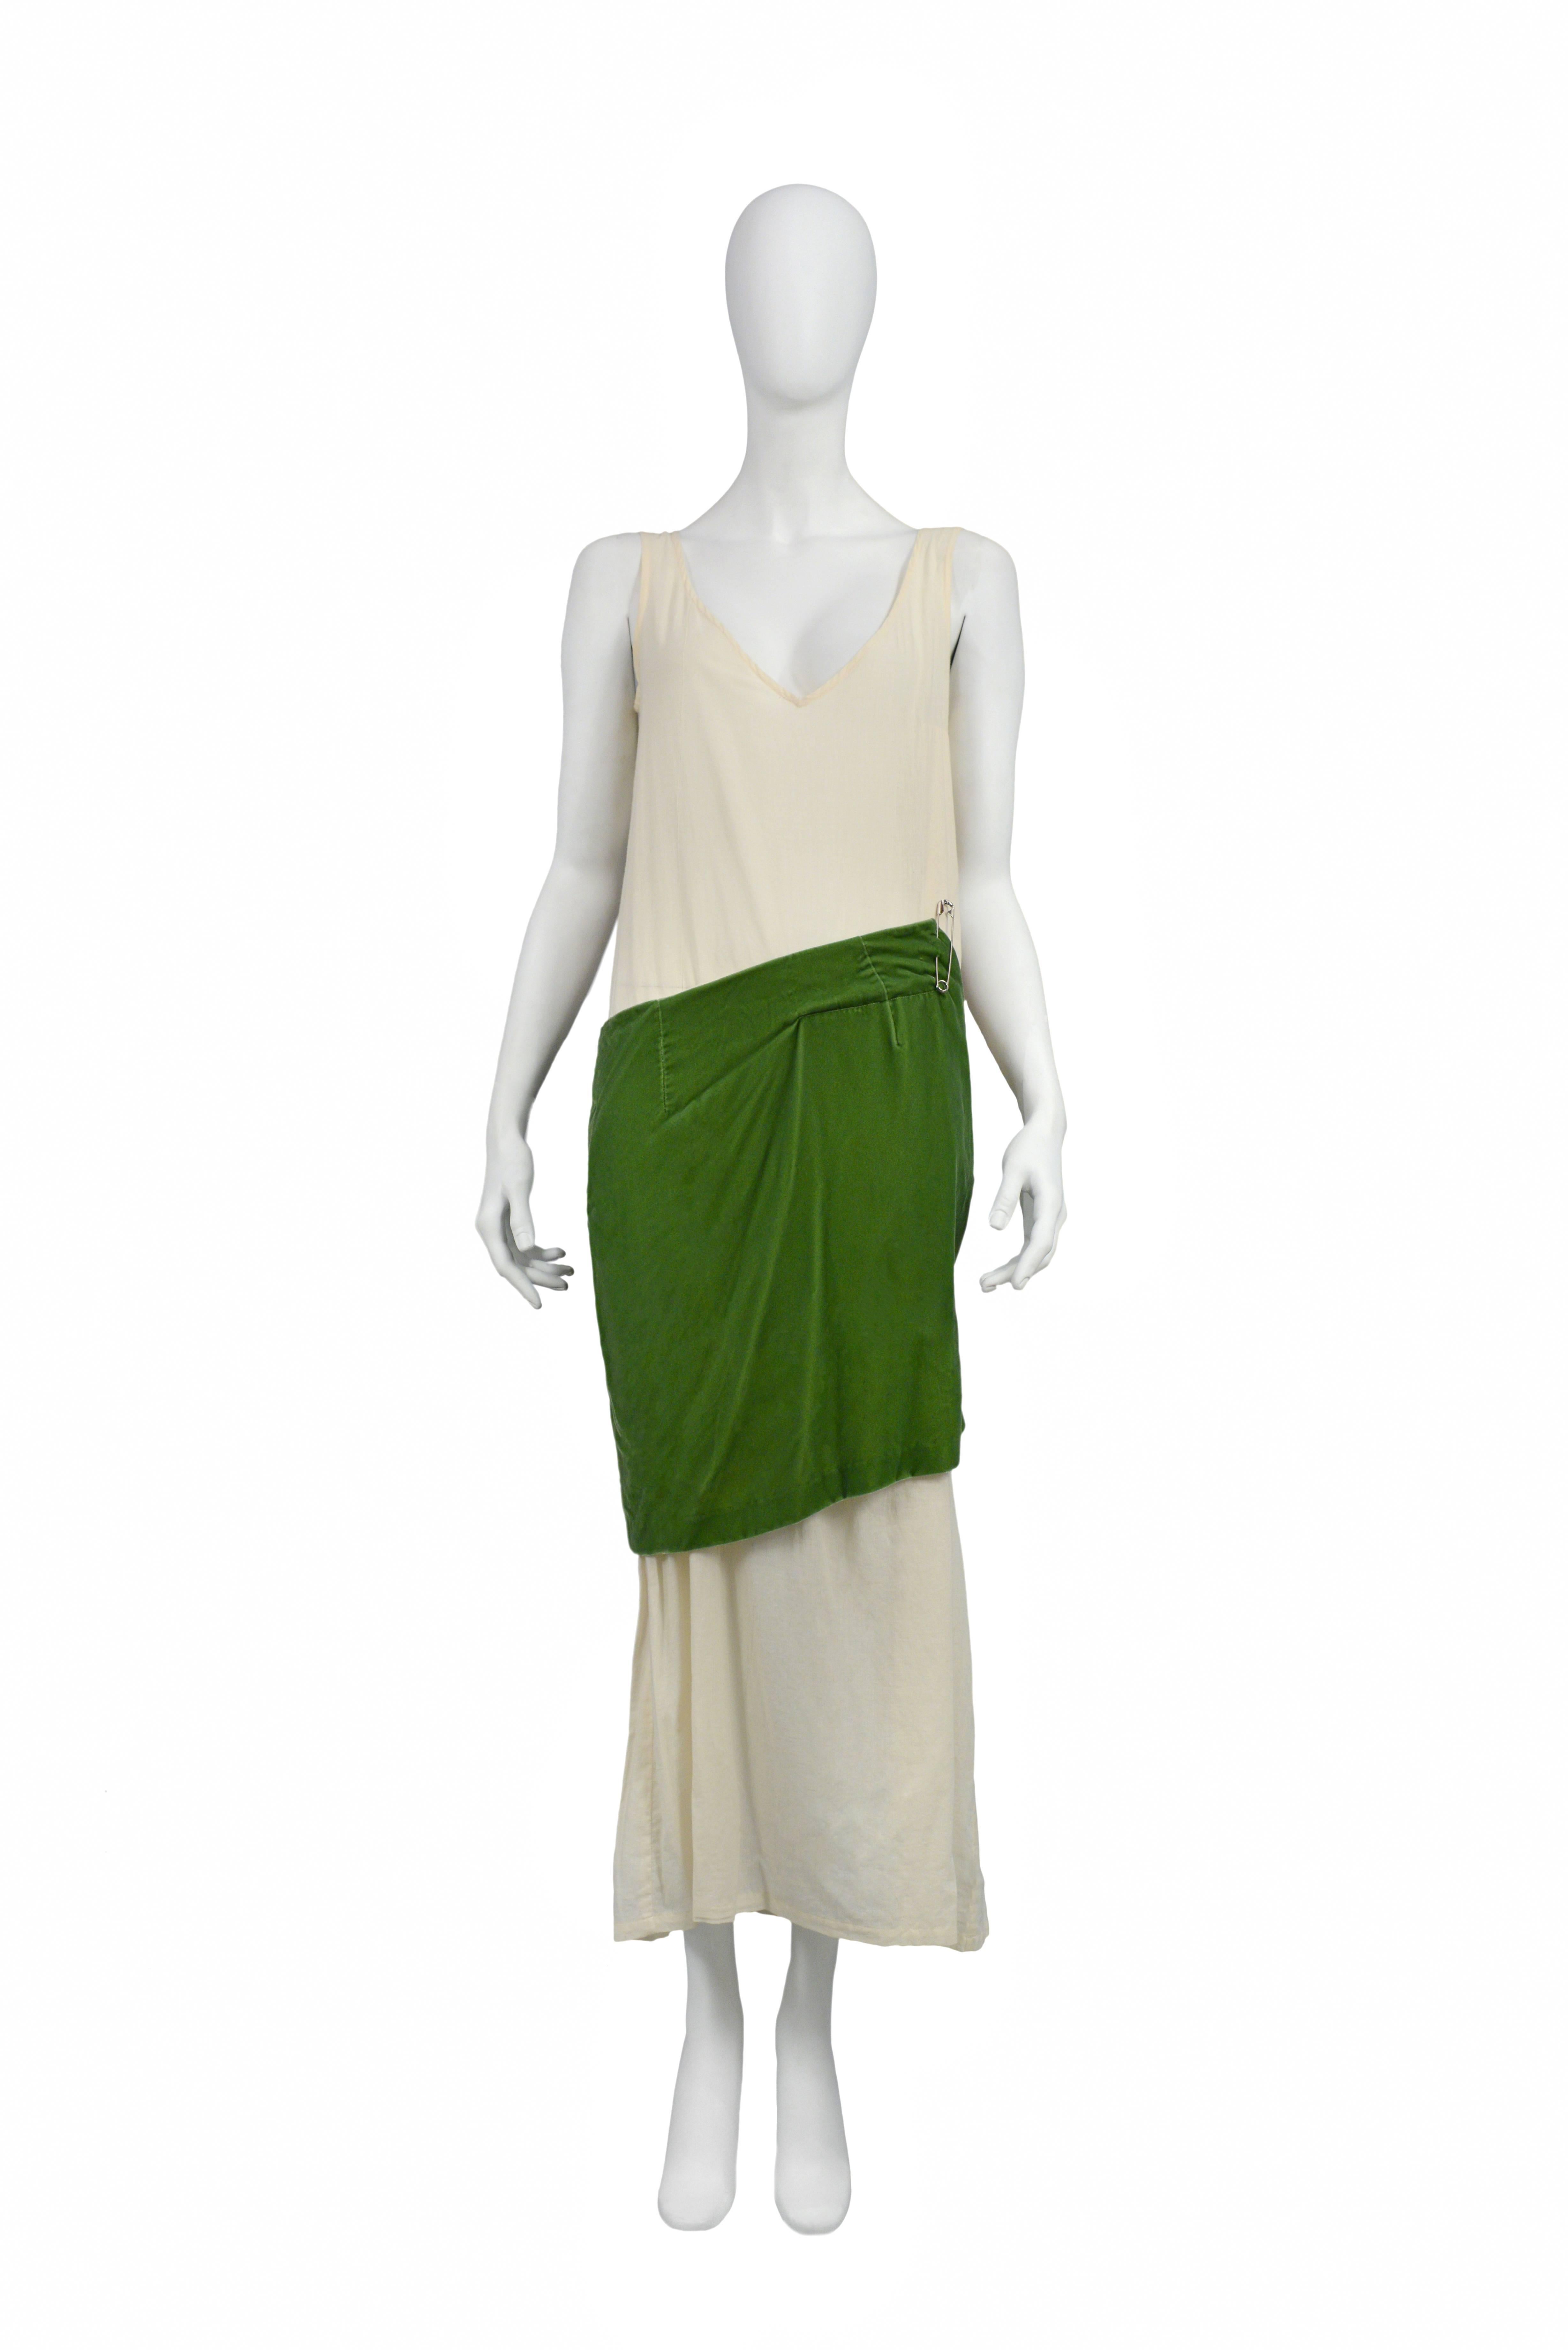 Iconic off white muslin and velvet gown. Bodice features dress makers off white muslin with v front and open seam at side. The skirt is made of green velvet and features an uneven hem. AW 1996.
Please inquire for additional images.